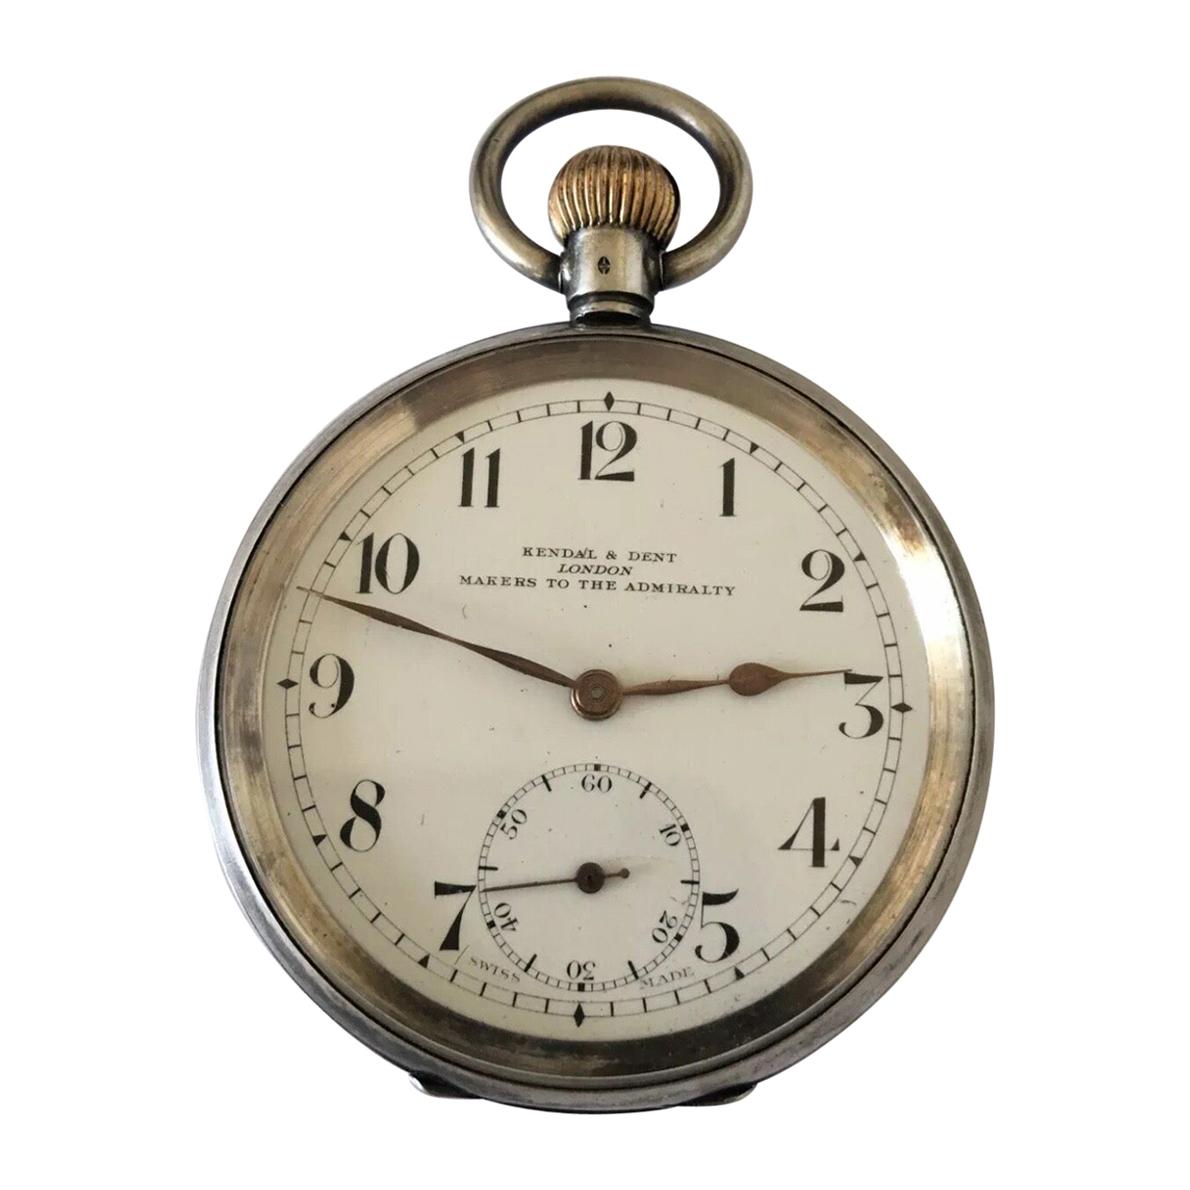 Antique Silver Swiss Made Pocket Watch Signed Kendal and Dent London